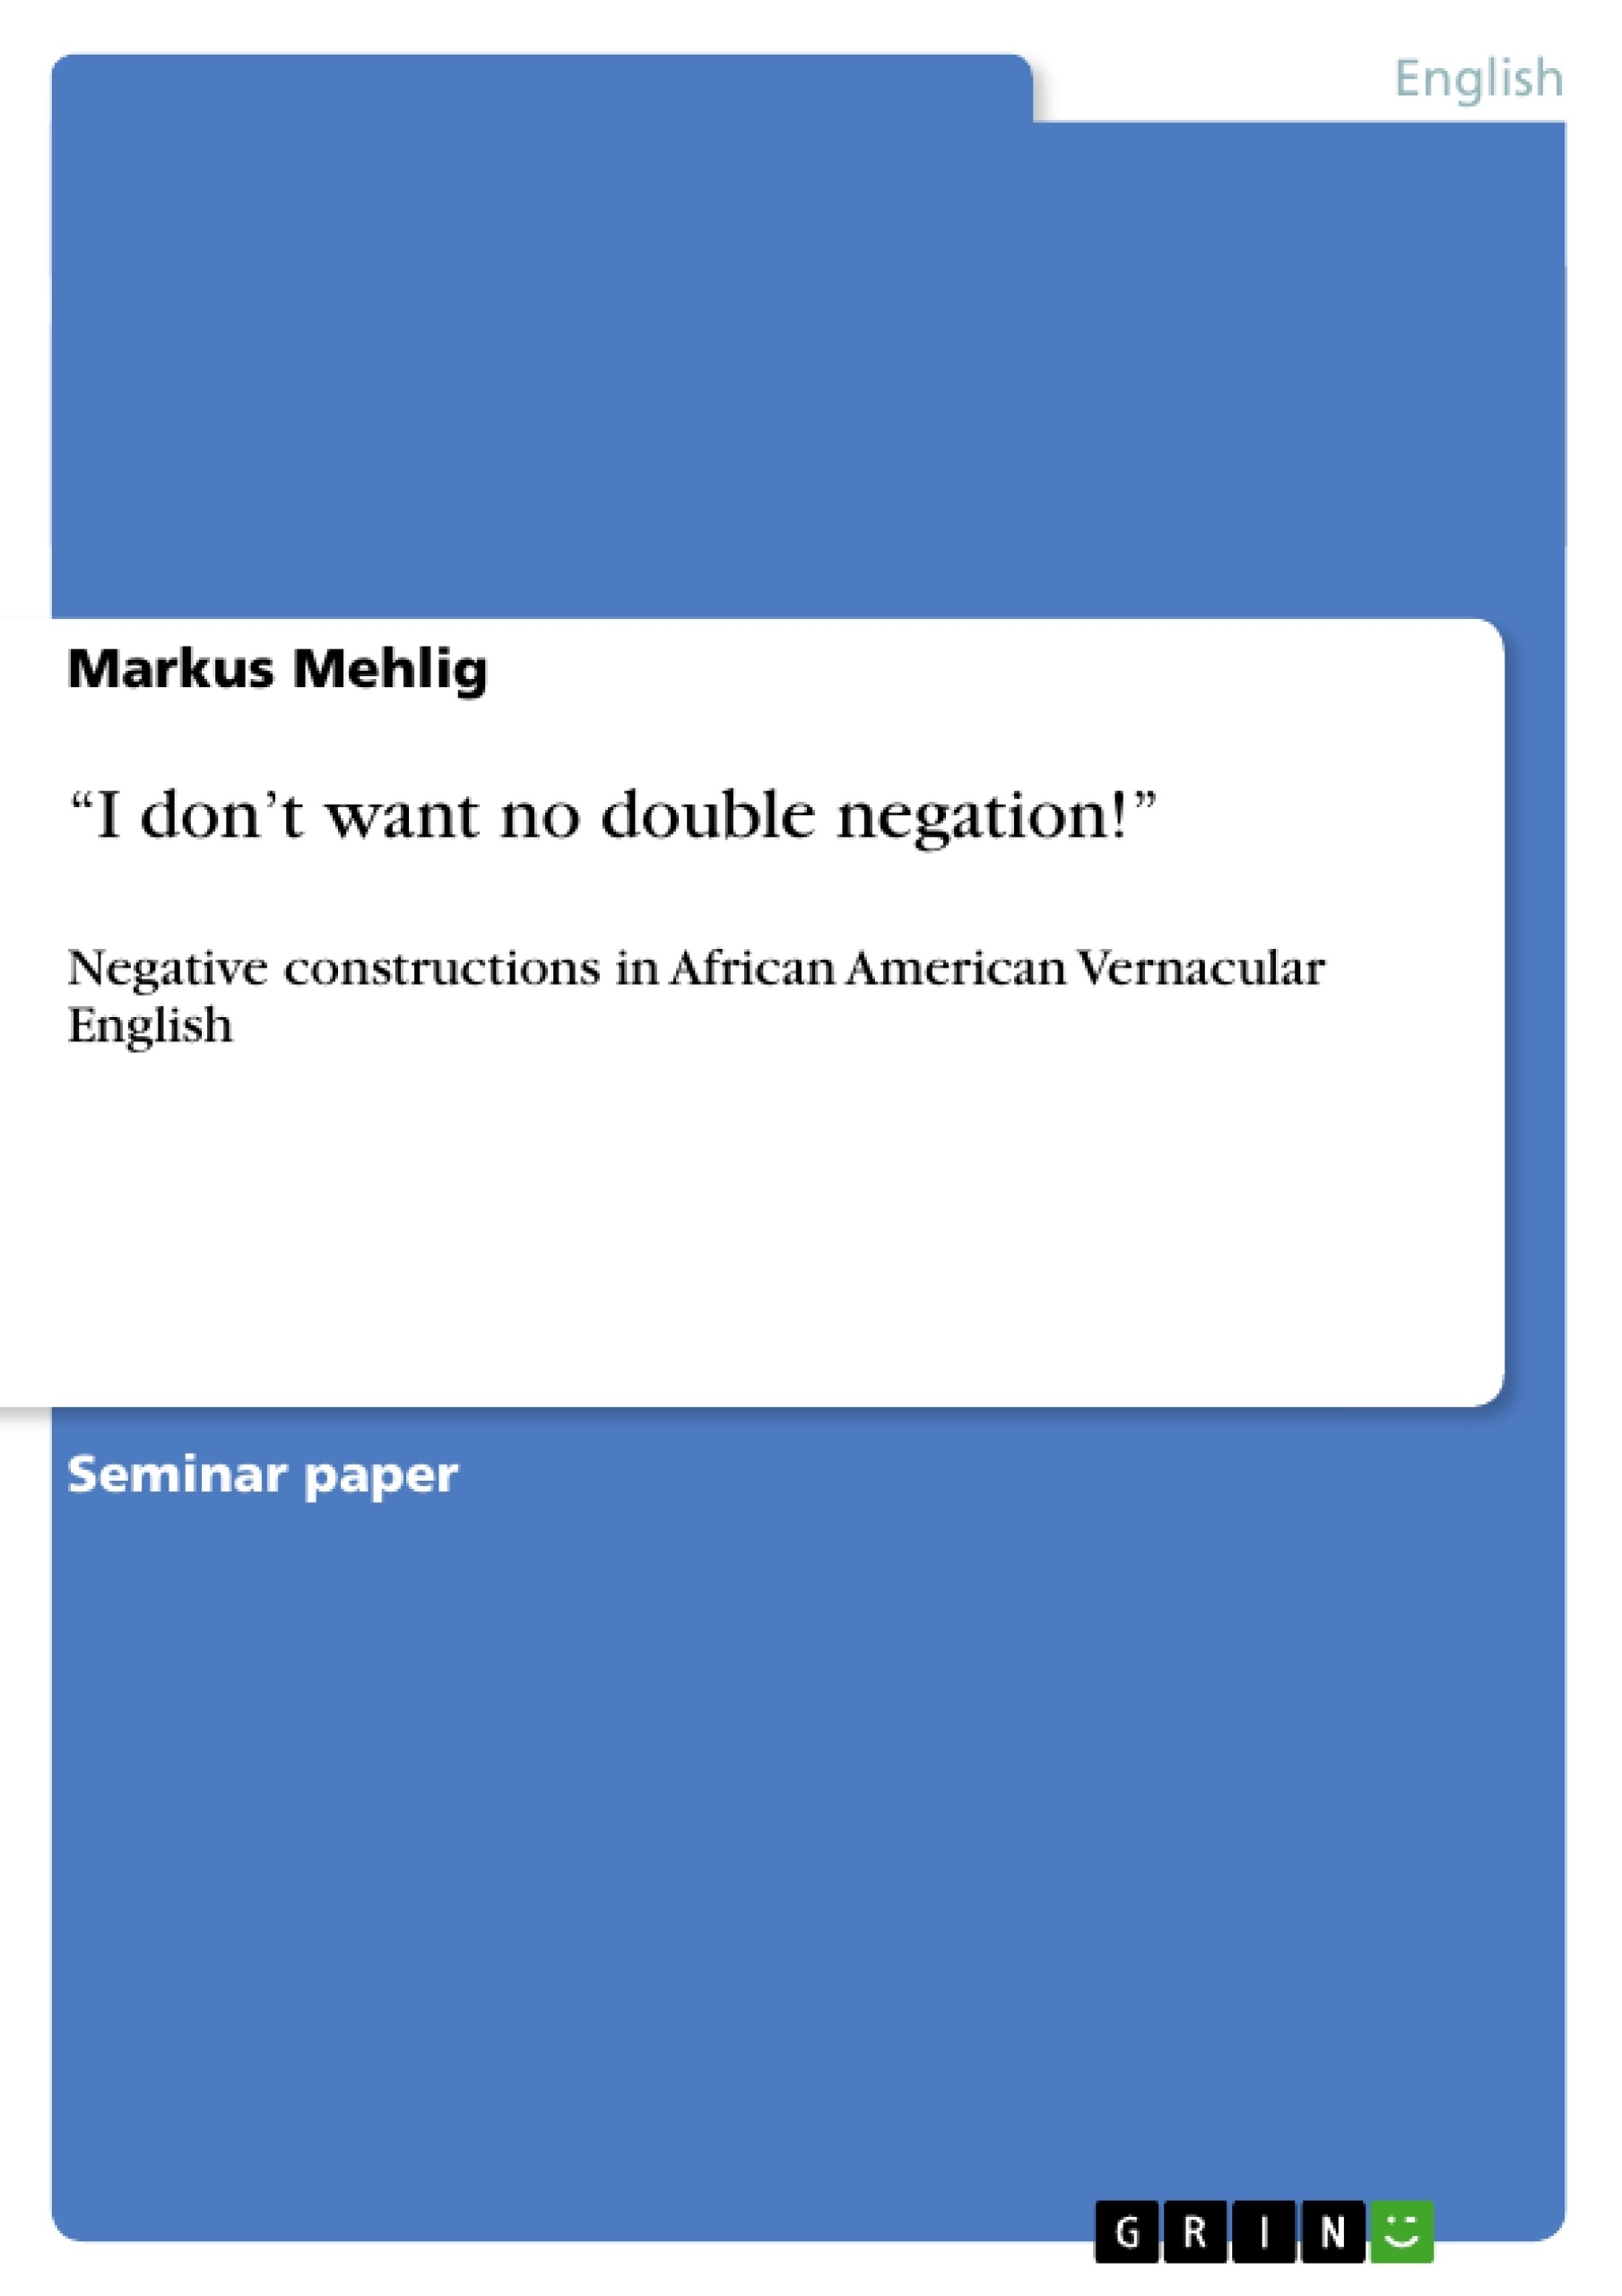 double negative in english